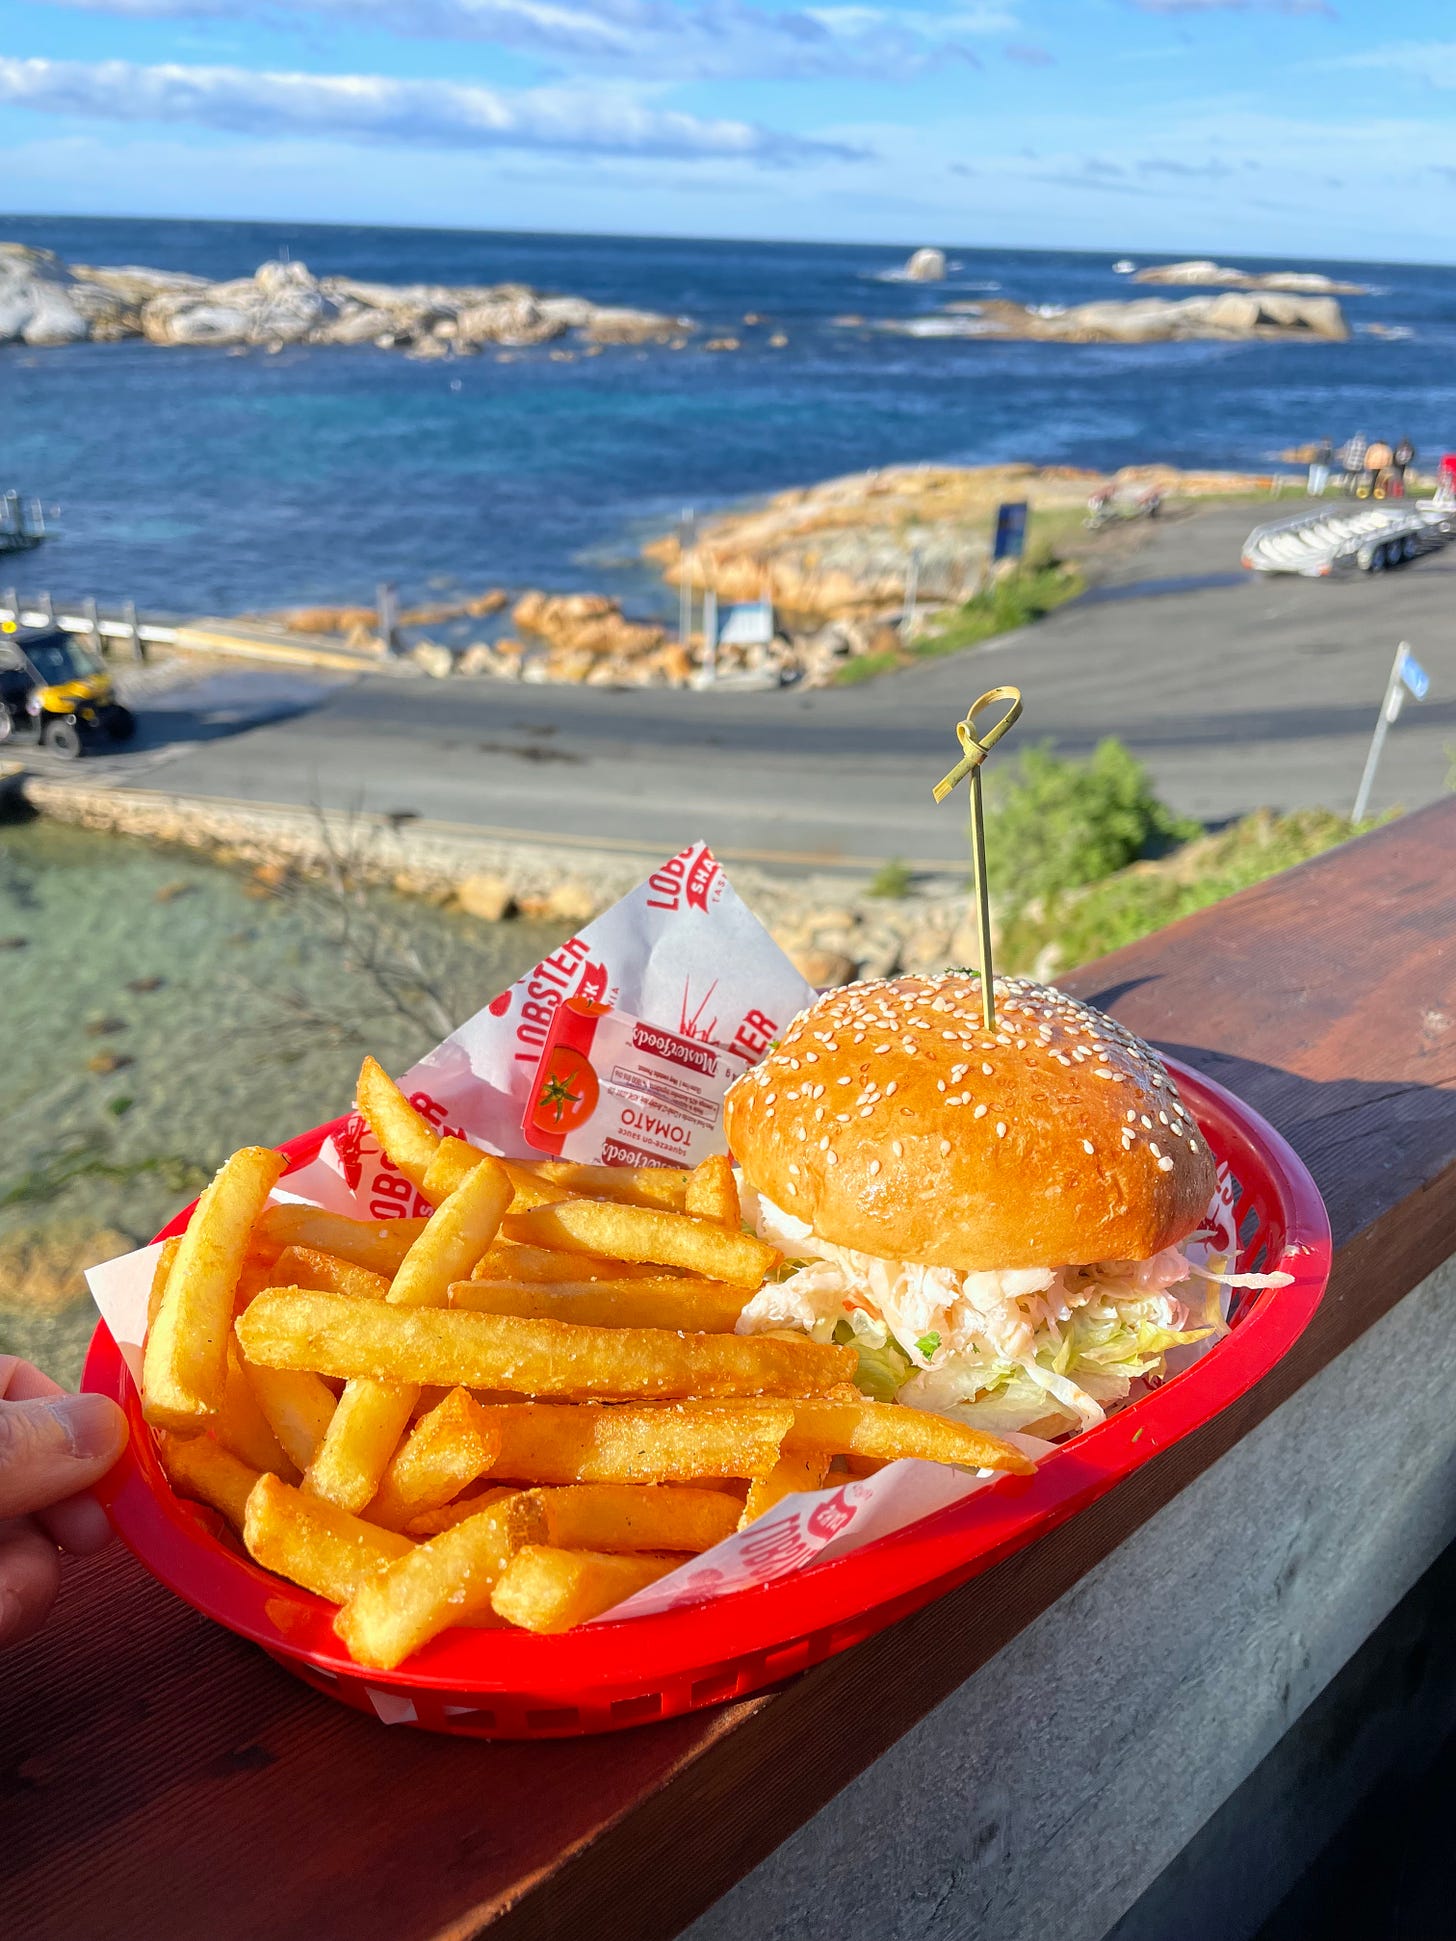 Lobster roll and chips at a water-side eatery that overlooks the sea.